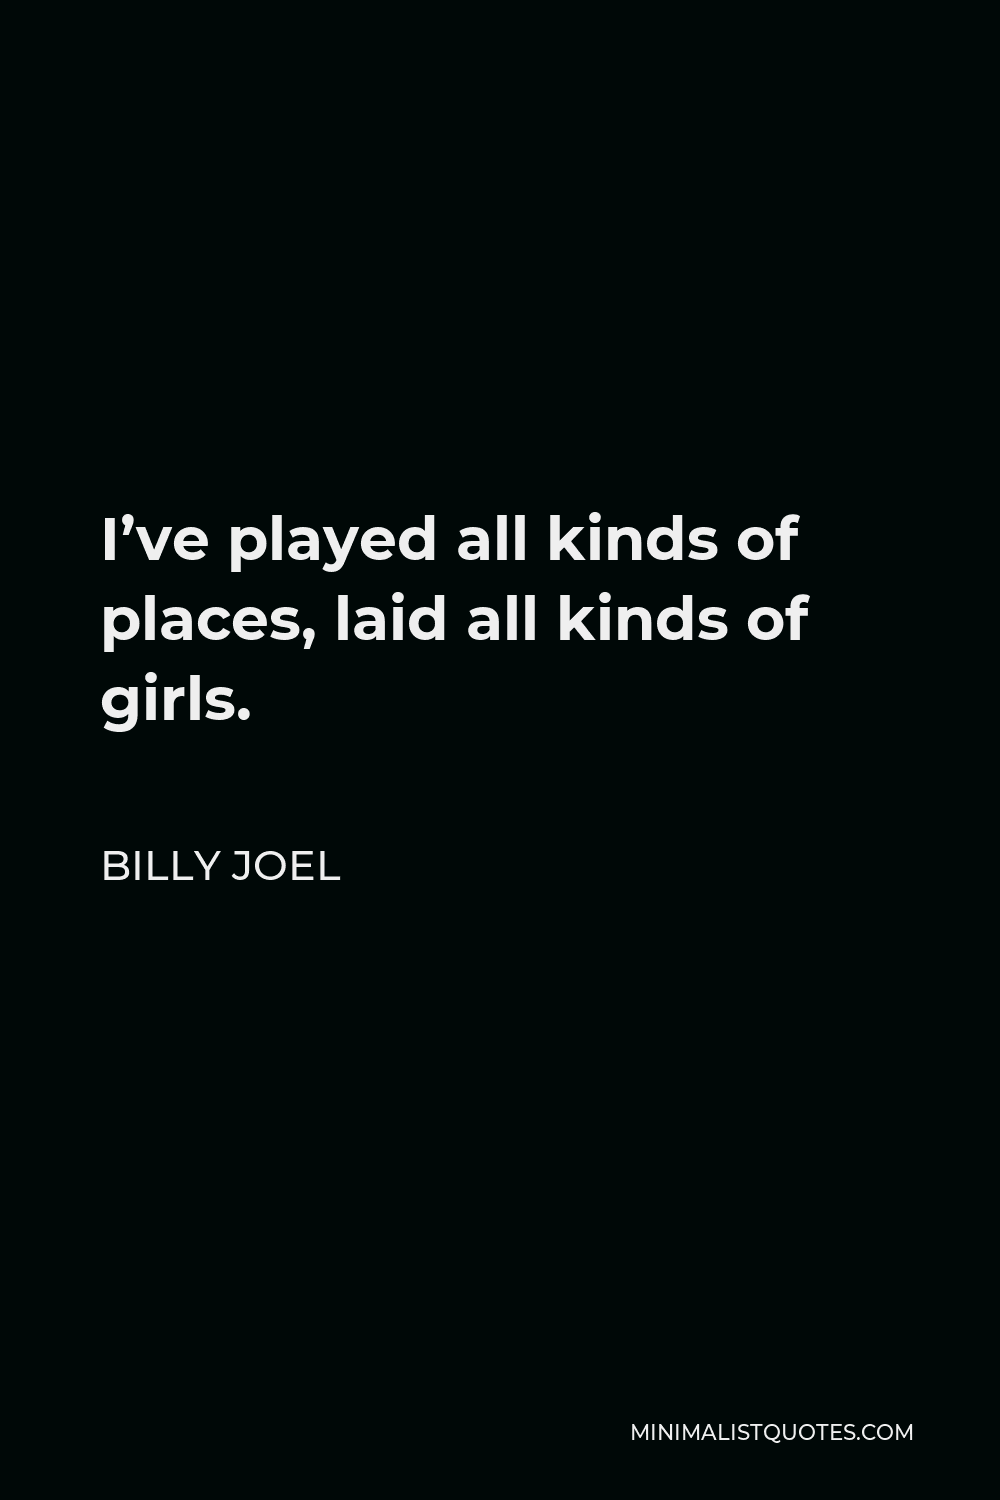 Billy Joel Quote - I’ve played all kinds of places, laid all kinds of girls.